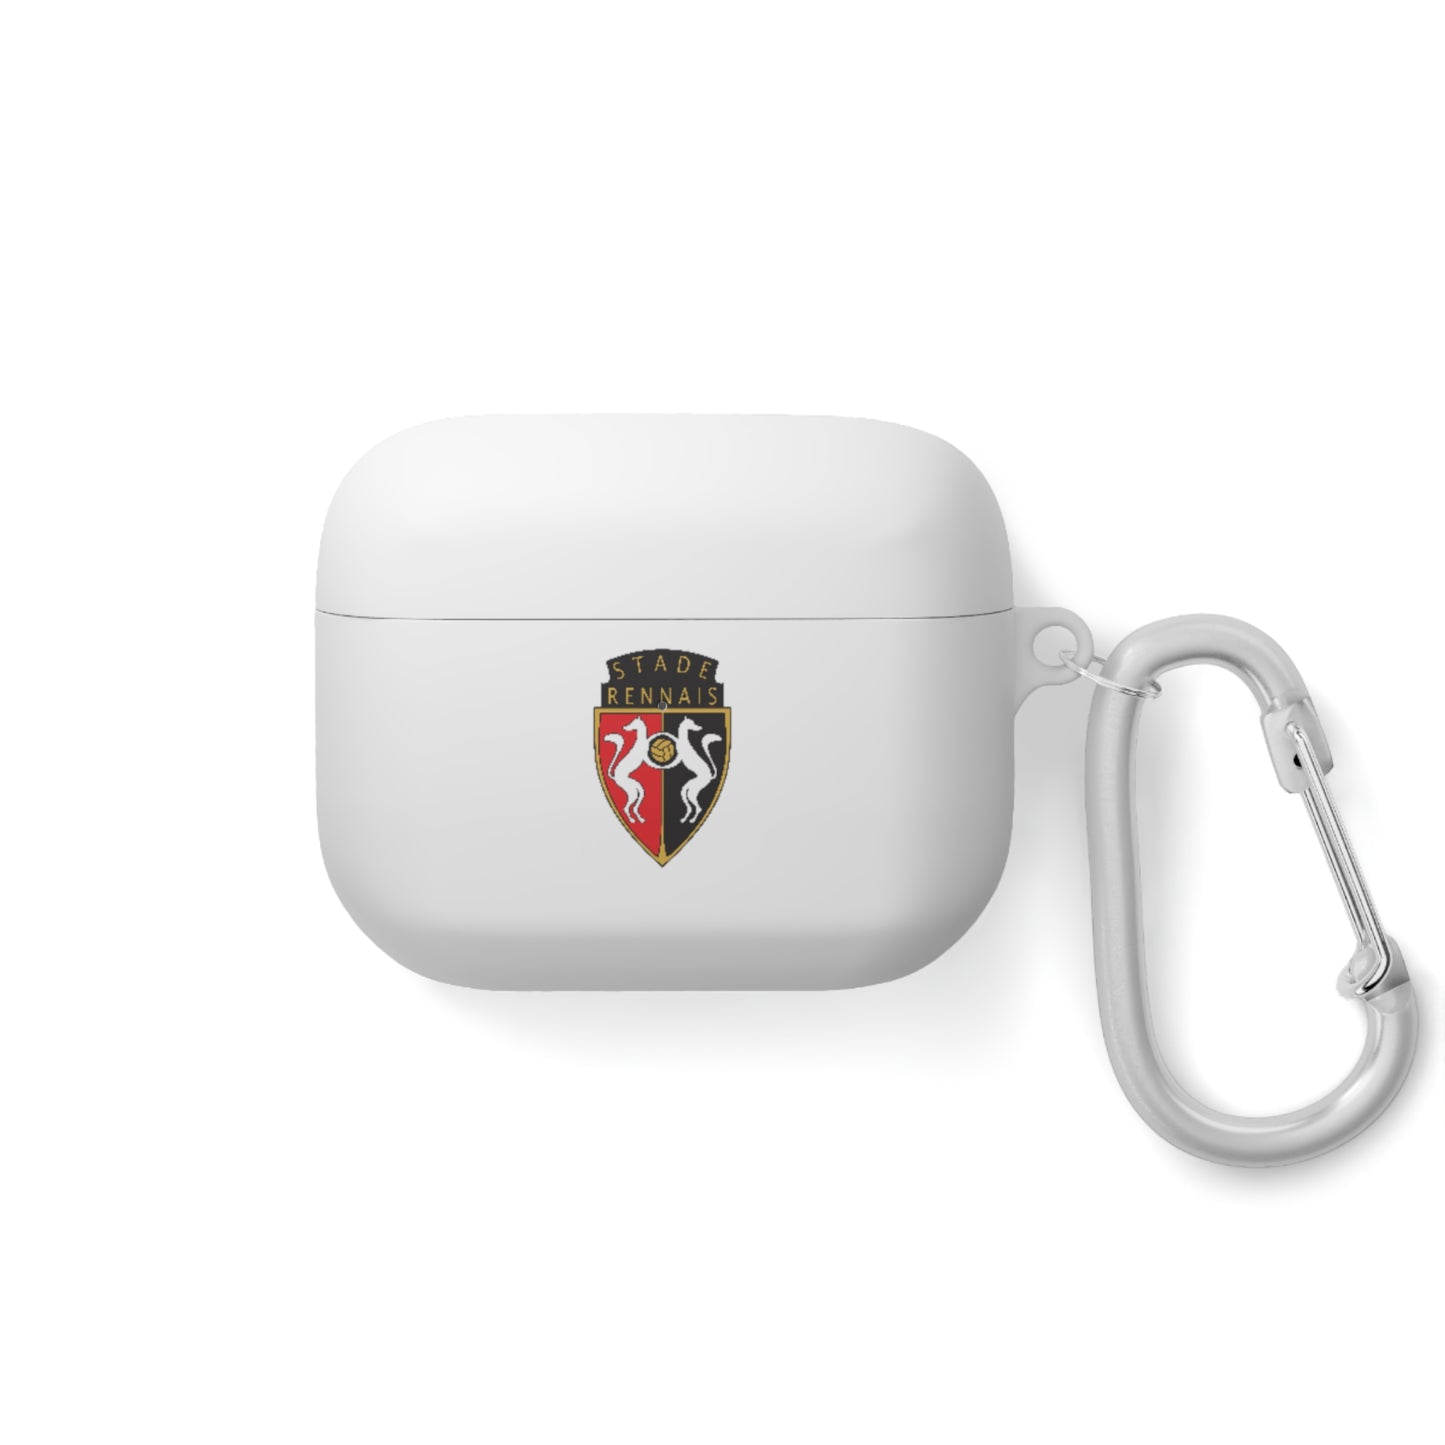 Stade Rennais (old logo) AirPods and AirPods Pro Case Cover